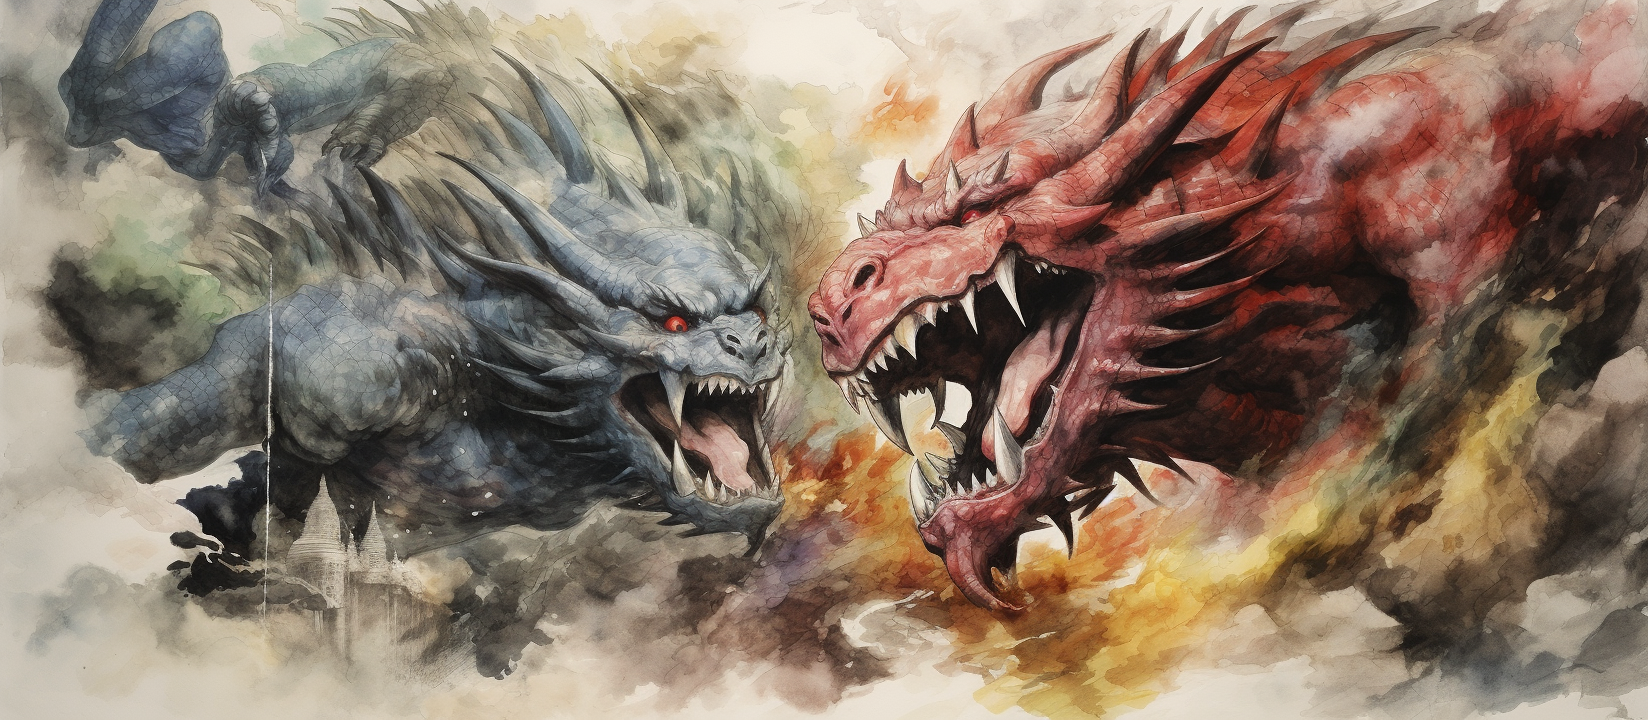 battle_of_gozilla_and_kinkong_watercolor_drawi_6c3584f2-384f-4be8-8829-4086d37be1b7.png